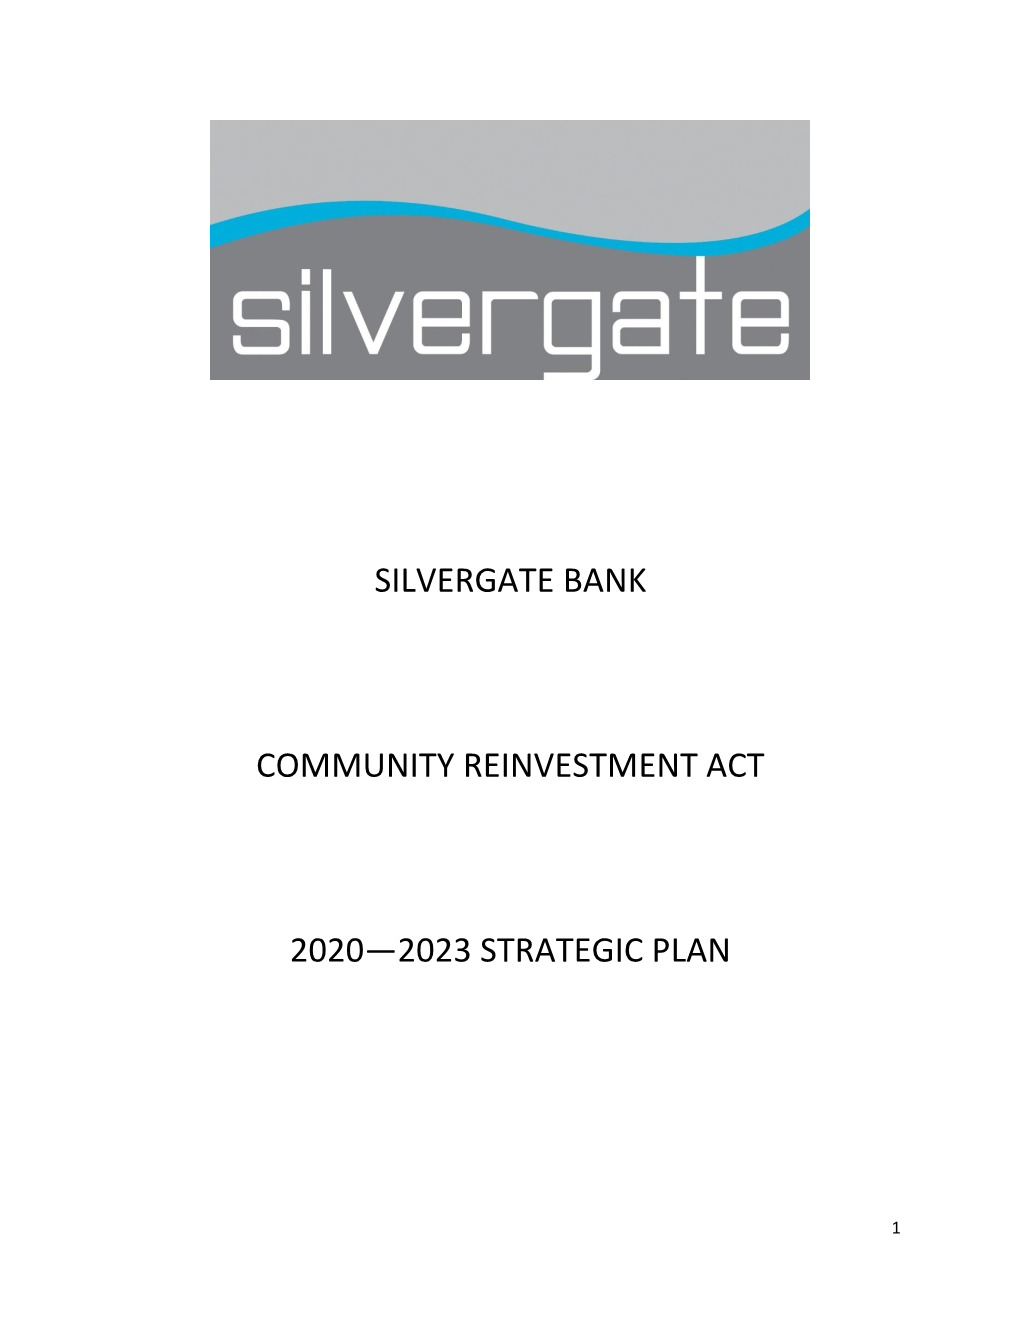 Silvergate Bank Community Reinvestment Act 2020—2023